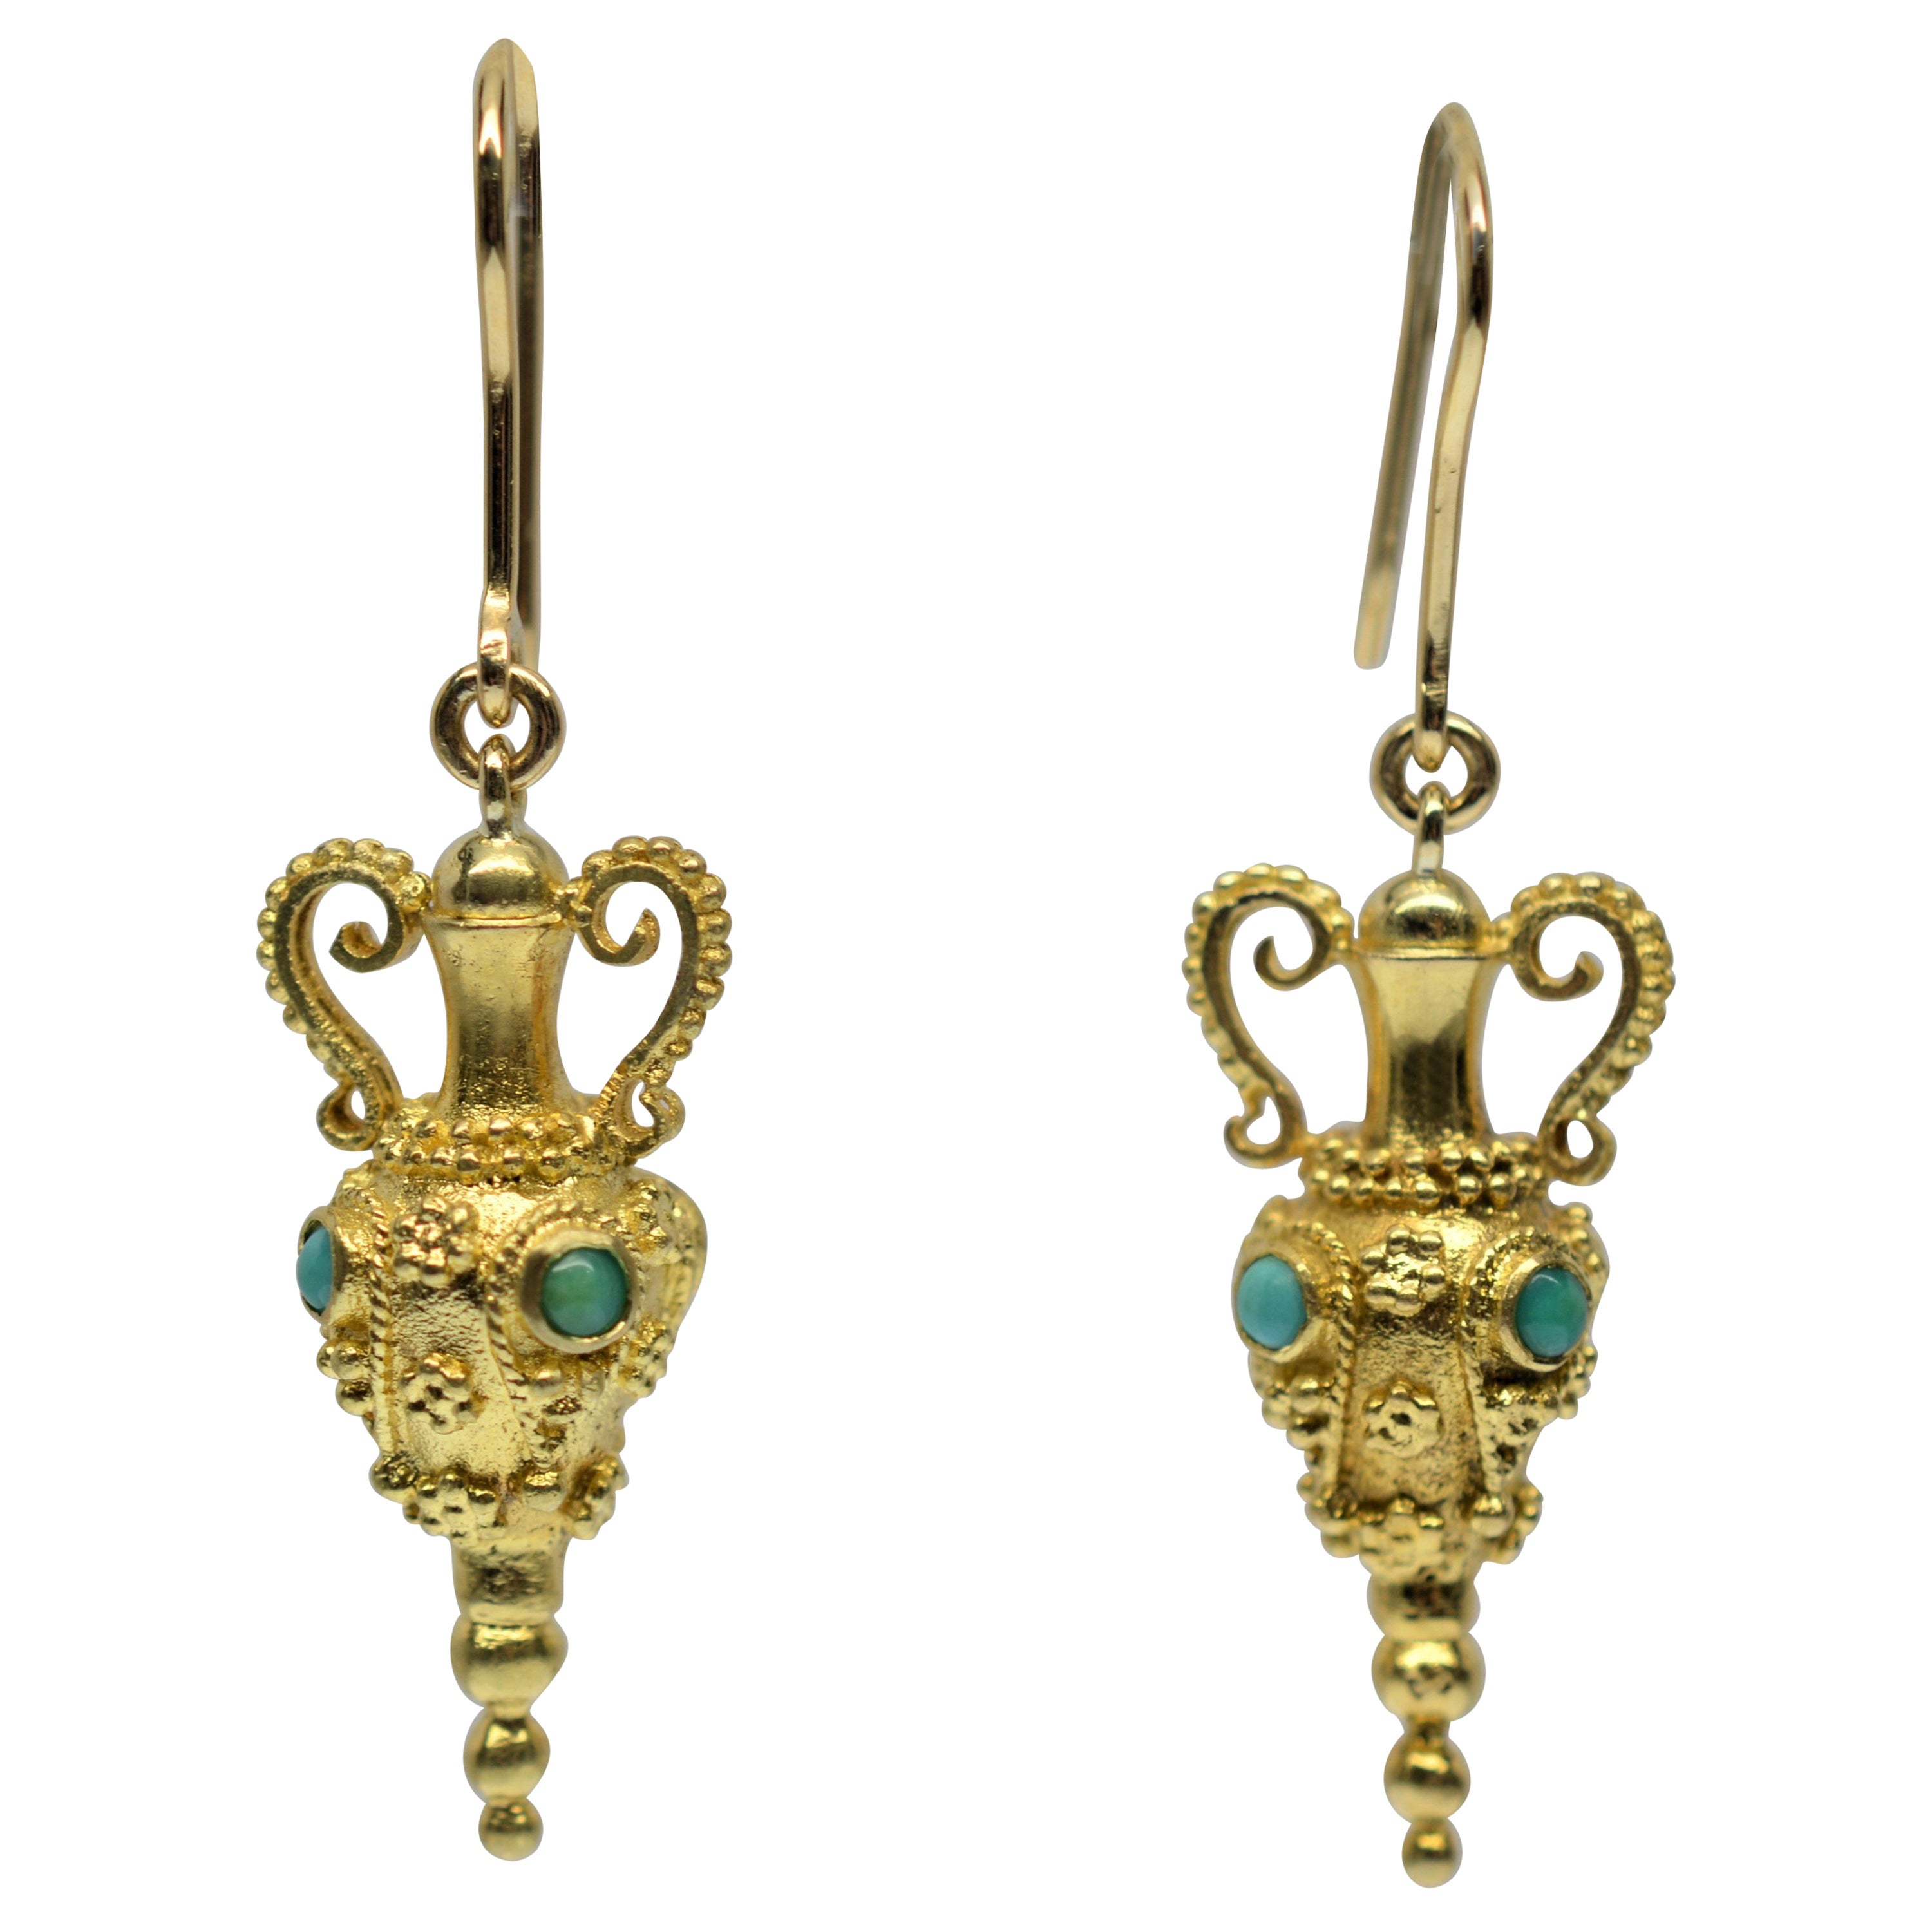 Elegant Turquoise Italian Gold Drop Earrings For Sale At 1stdibs